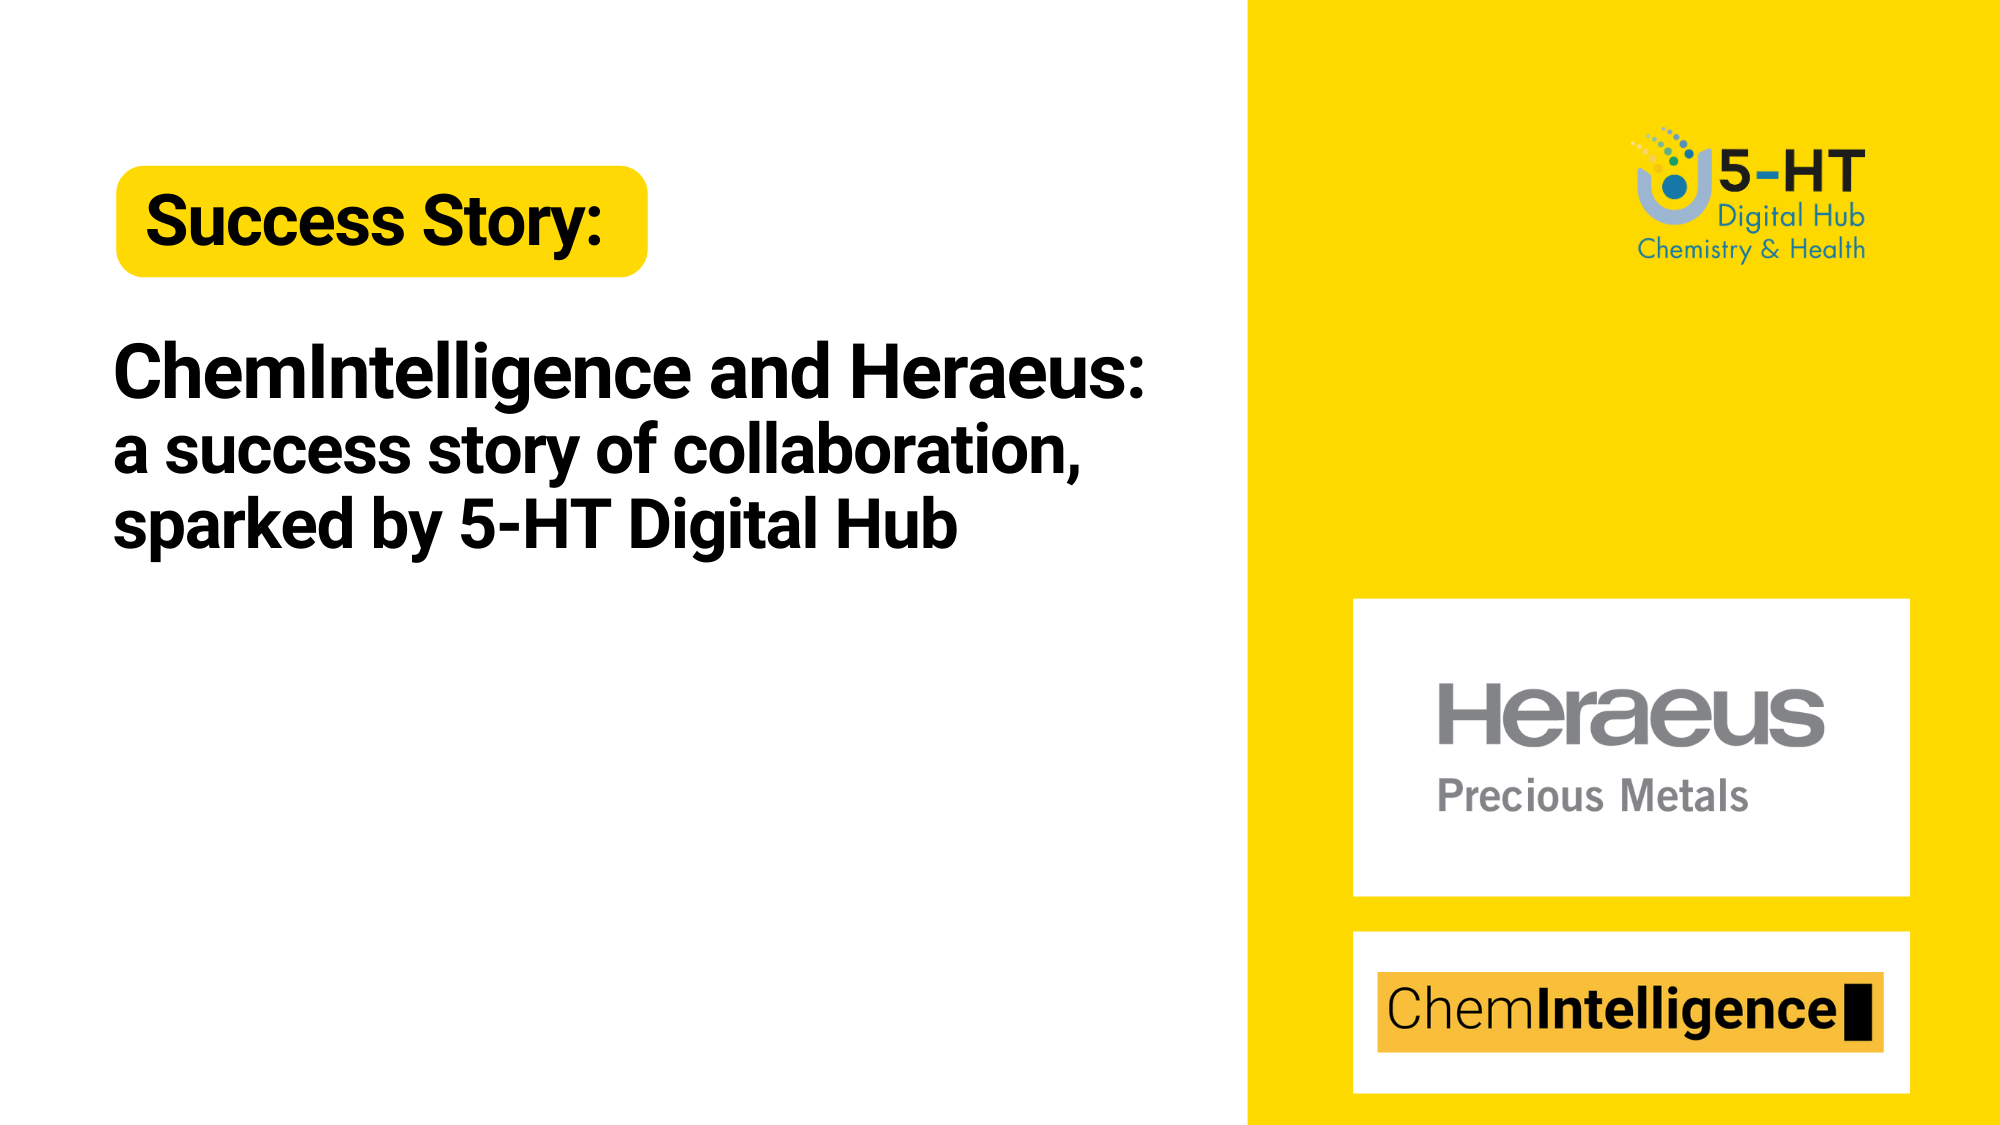 ChemIntelligence and Heraeus: a success story of collaboration, sparked by 5-HT Digital Hub